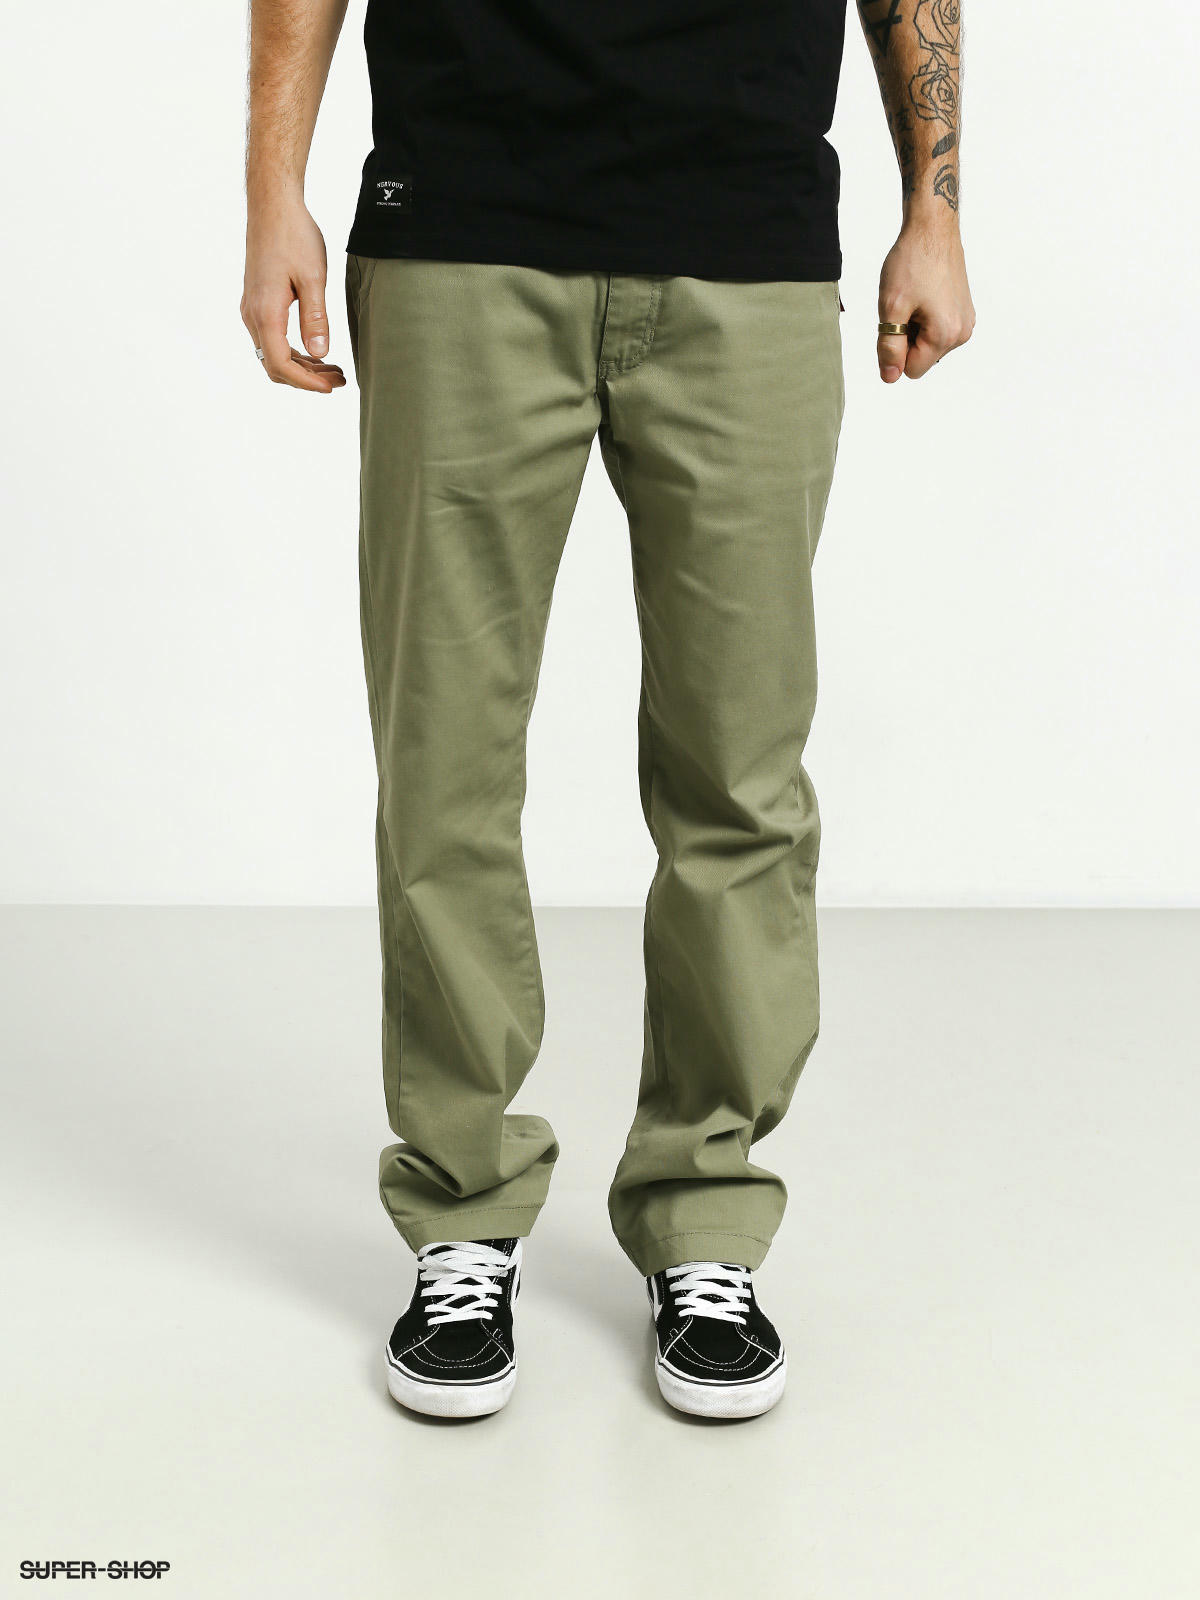 Vans Authentic Chino Pro Pants (oil green)